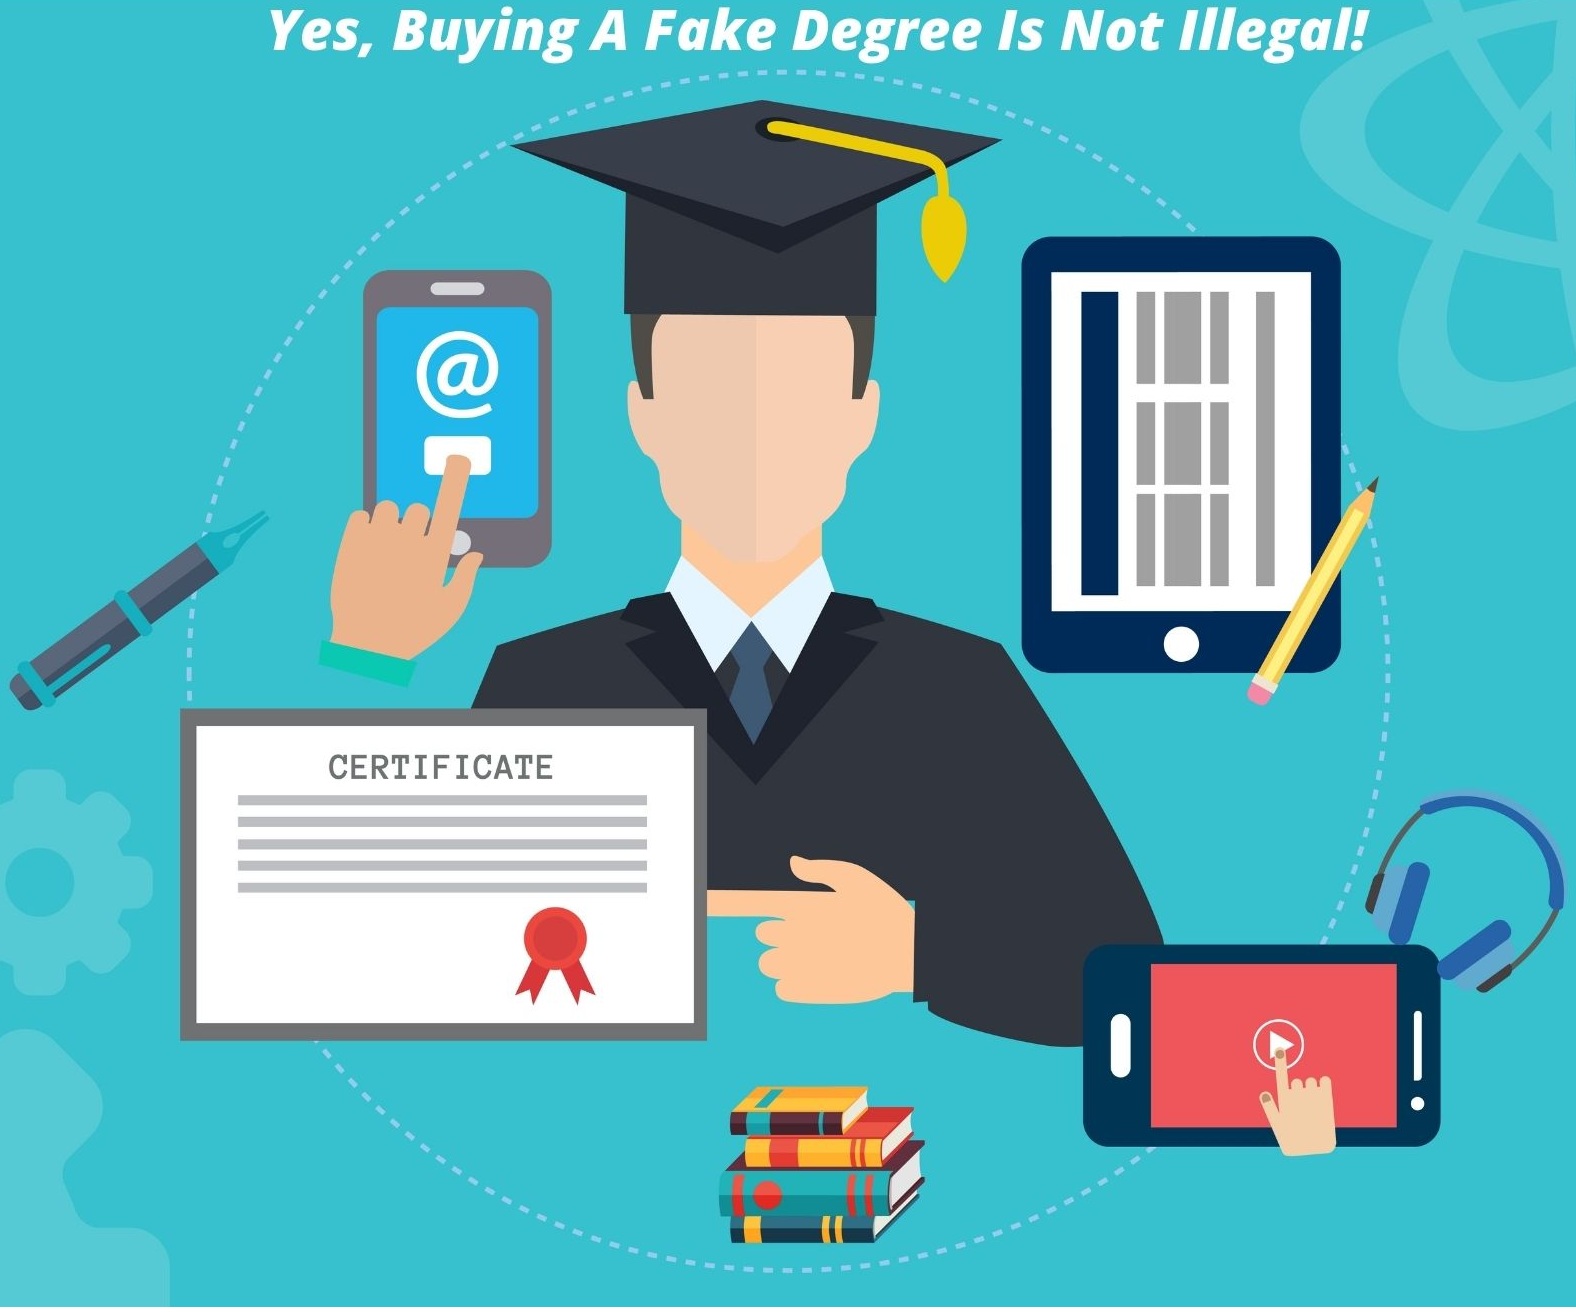 Yes, Buying A Fake Degree is Not Illegal!